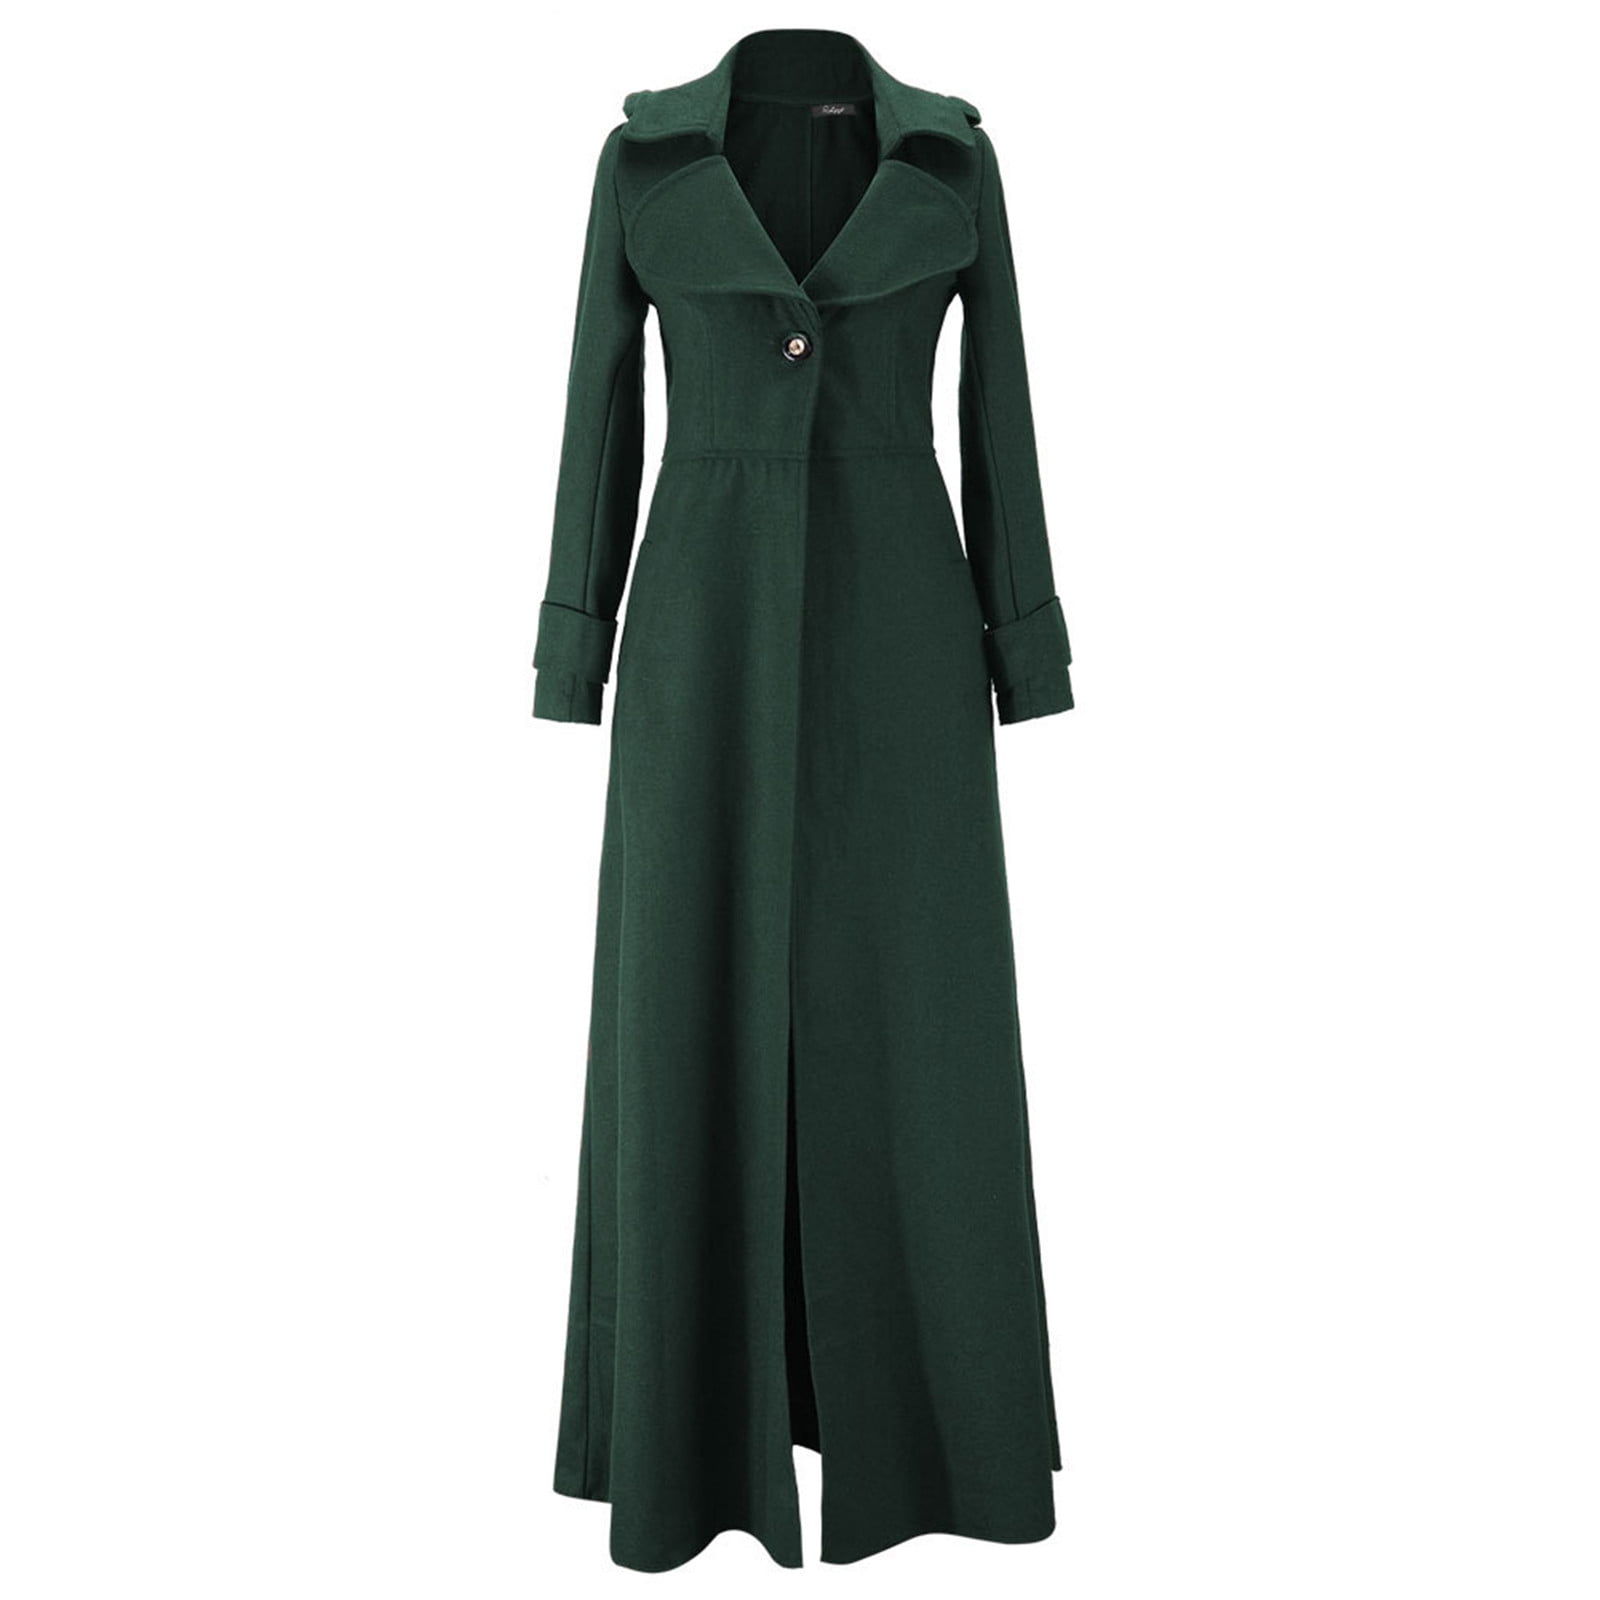  ebossy Women's Double Breasted Duster Trench Coat Slim Full  Length Maxi Long Overcoat (X-Small, Army Green) : Clothing, Shoes & Jewelry